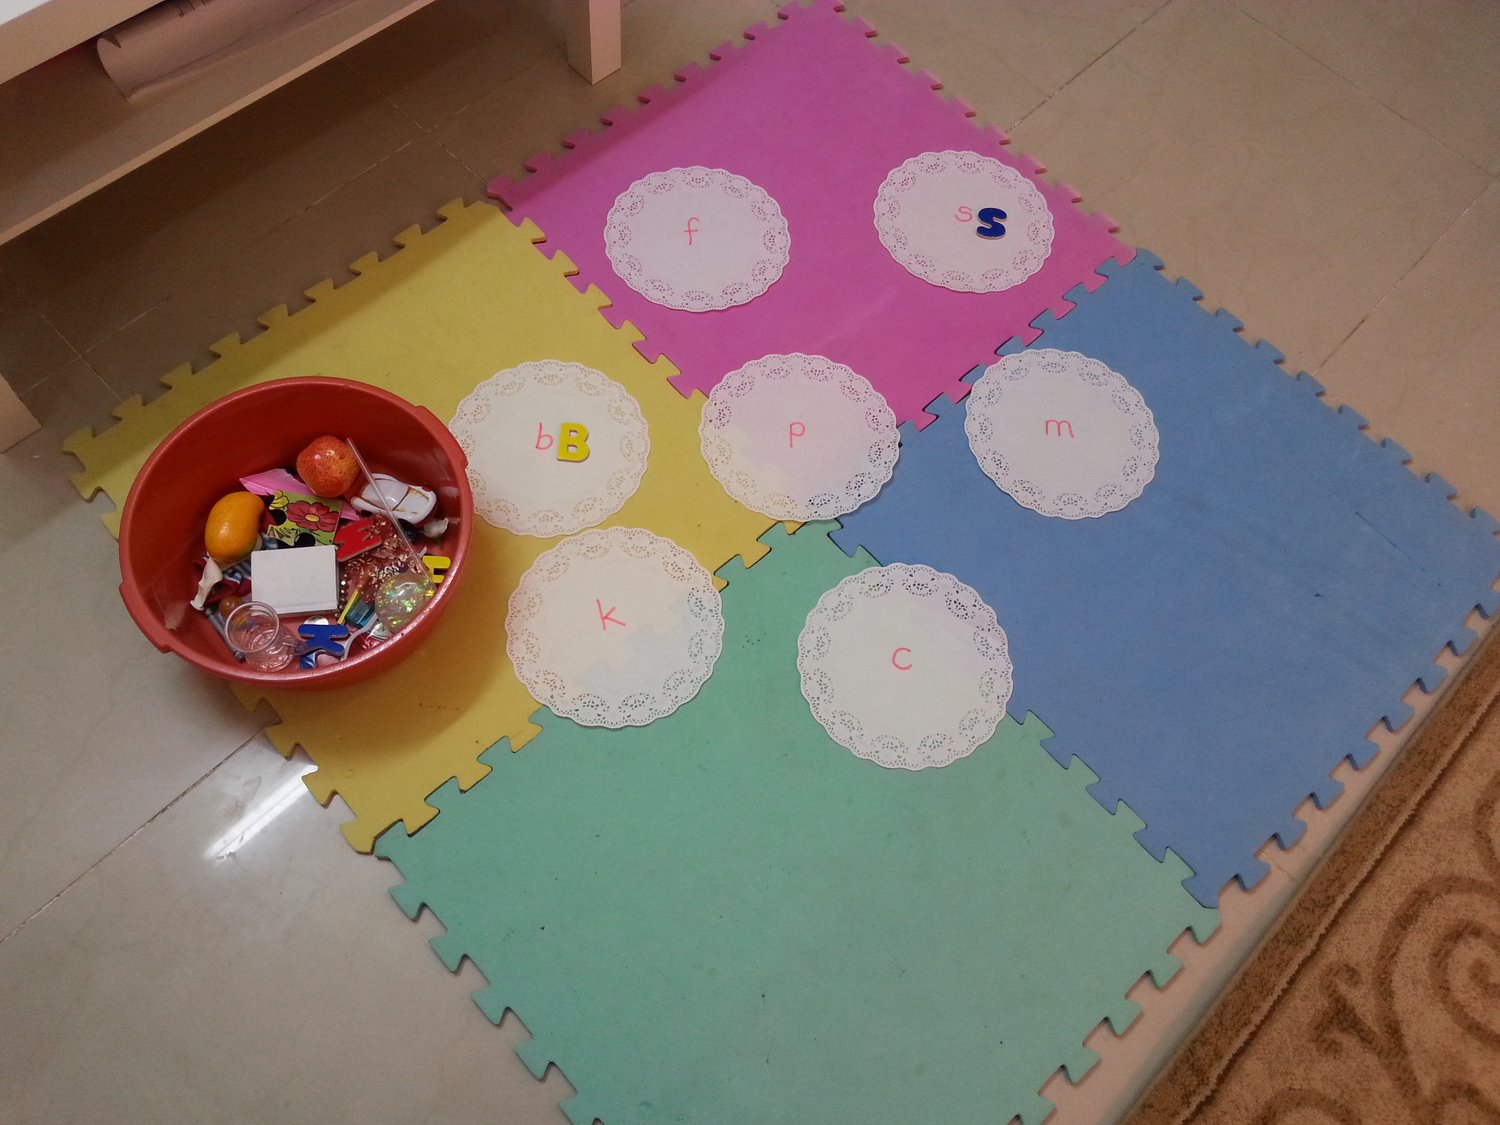 Initial Letter Sound Sorting Activity Montessori Inspired